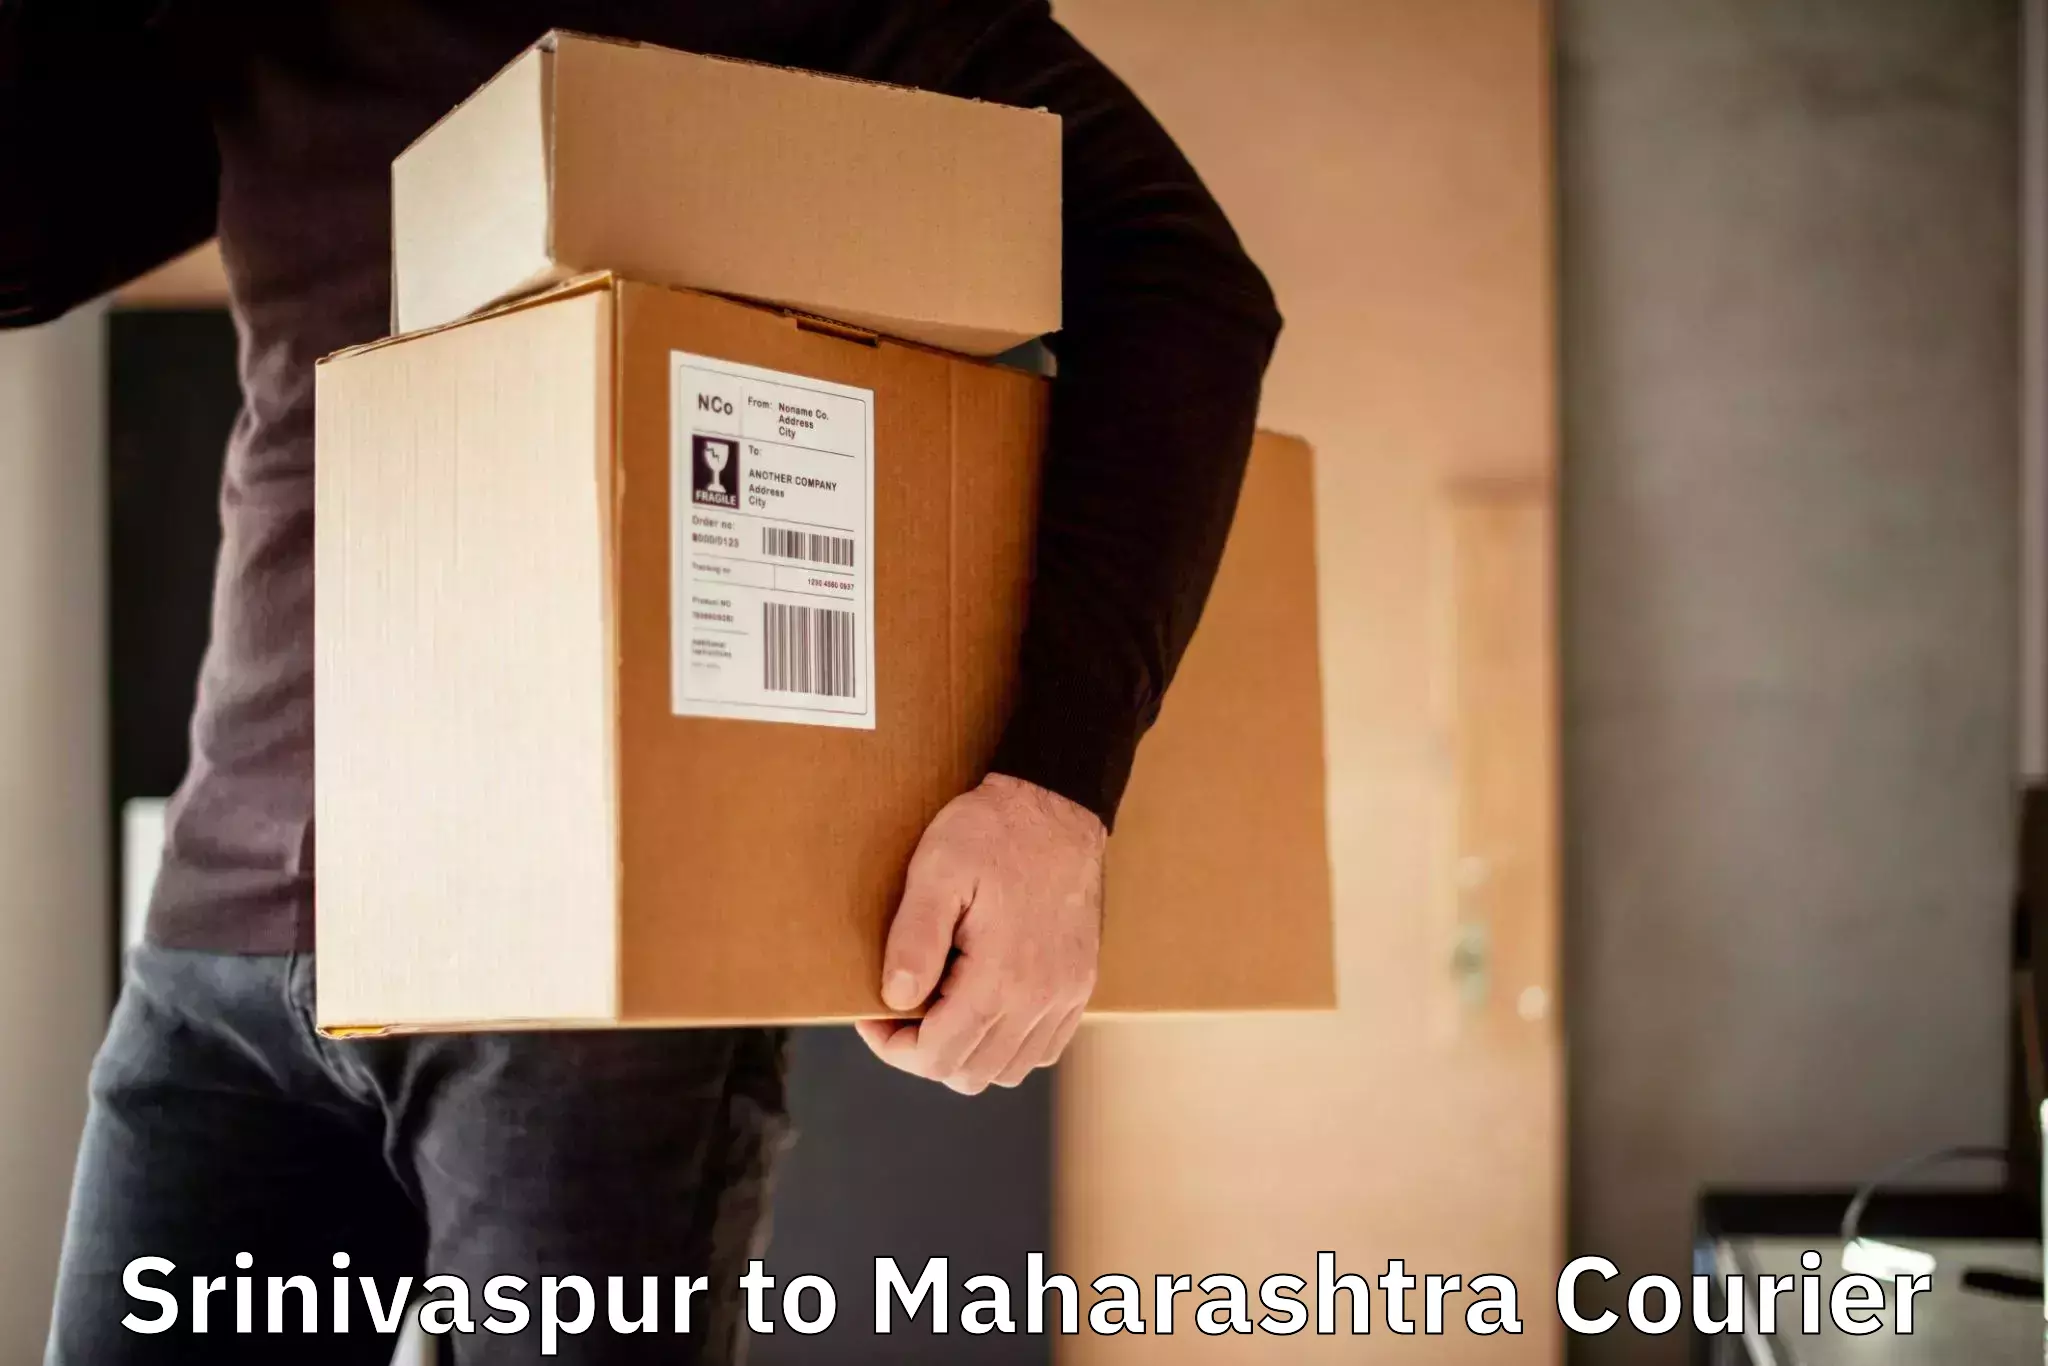 Automated parcel services Srinivaspur to SVKMs Narsee Monjee Institute of Management Studies Mumbai